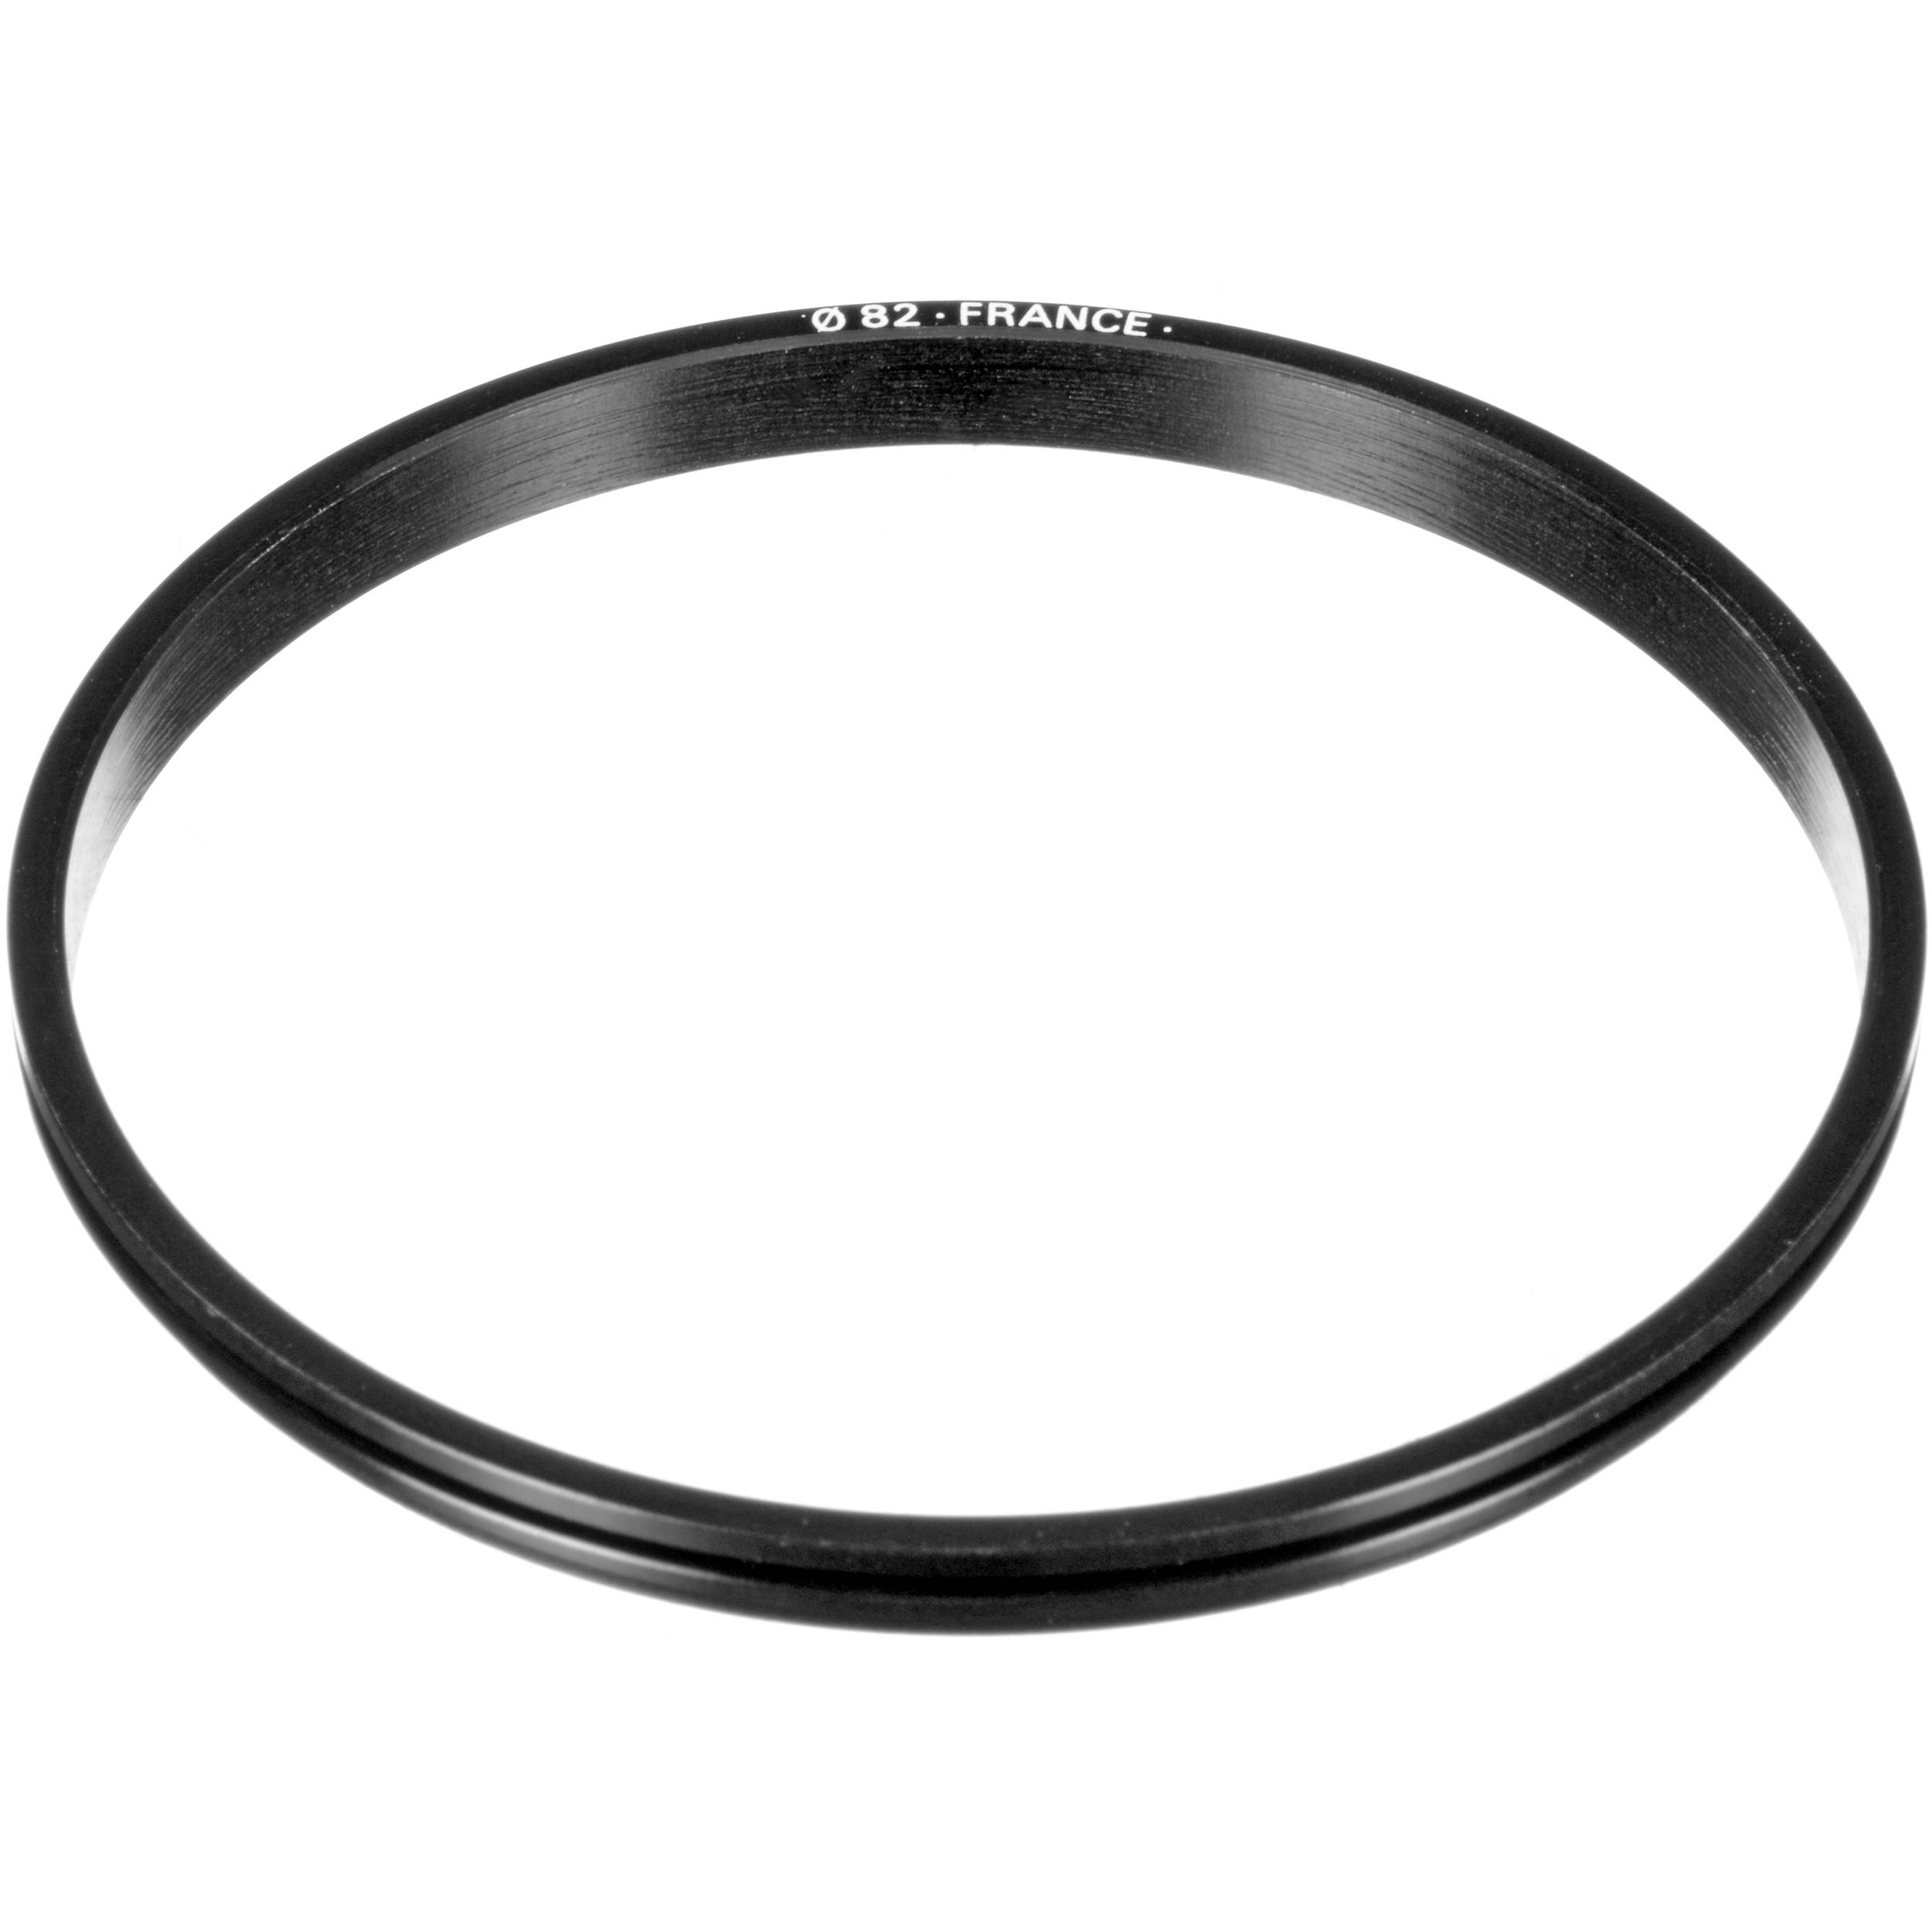 Cokin P Series Filter Holder Adapter Ring 82mm Cp482 B H Photo • rotate, slide, decentre in all directions for more precision. cokin p series filter holder adapter ring 82mm